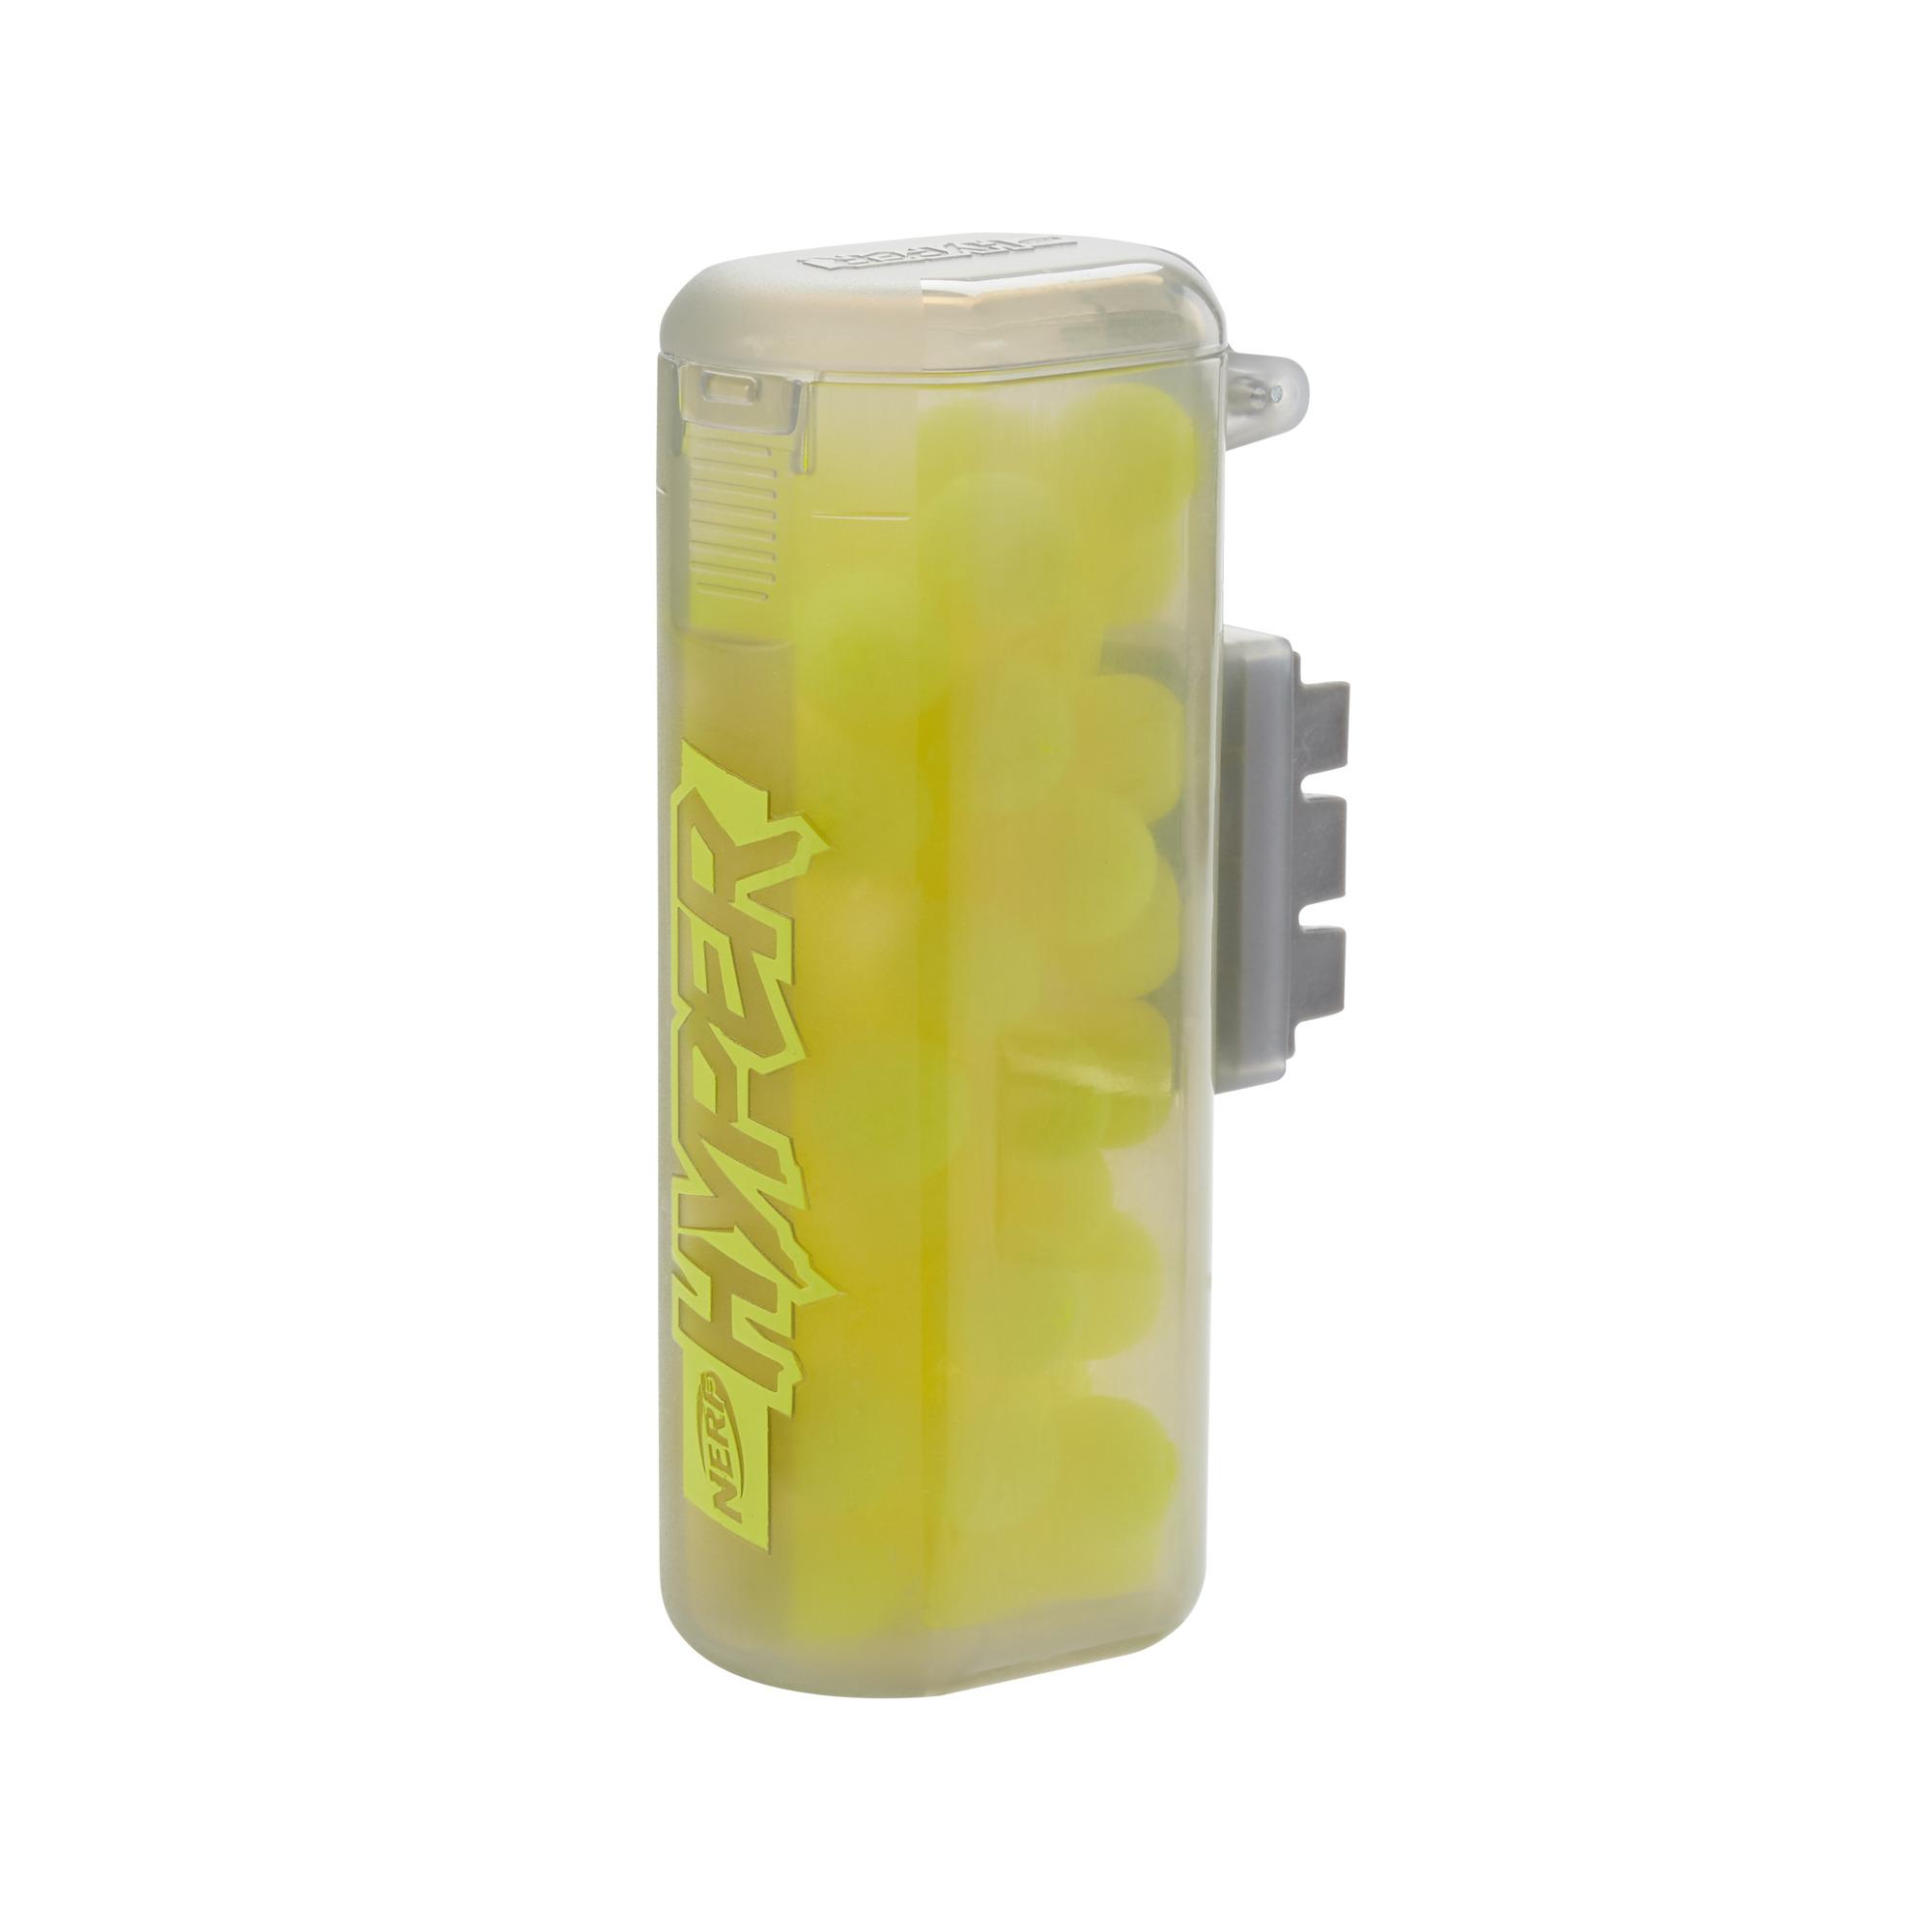 Nerf Hyper 50-Round Refill Canister -- Includes Easy Reload Canister and 50 Nerf Hyper Rounds For Nerf Hyper Blasters